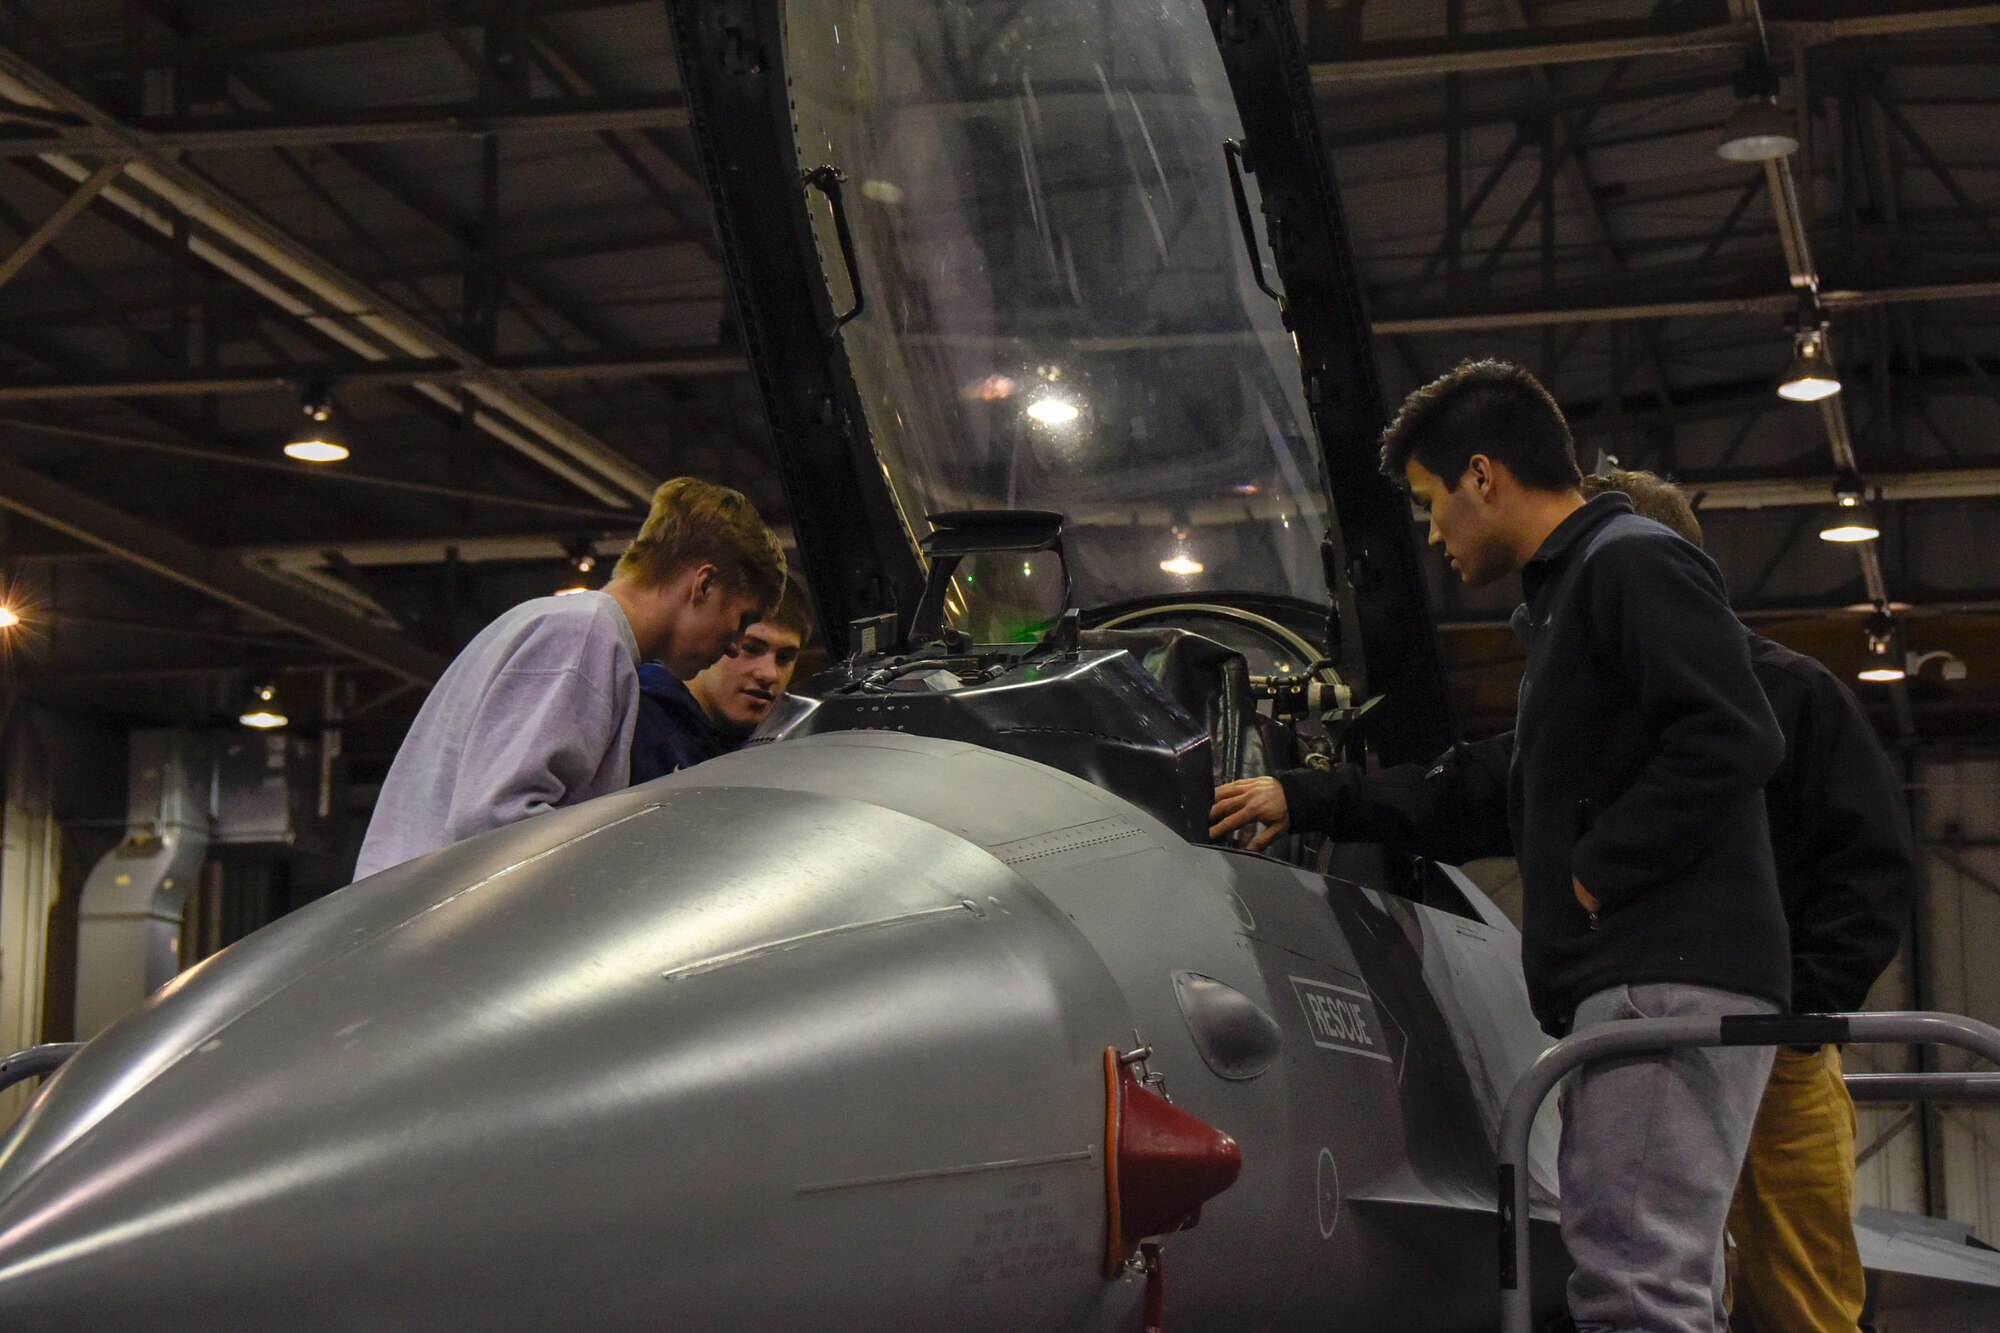 High School students take a quick look at a F-16 Fighting Falcon cockpit during Night Flying Career Day at Joe Foss Field, S.D. on April 17, 2018.